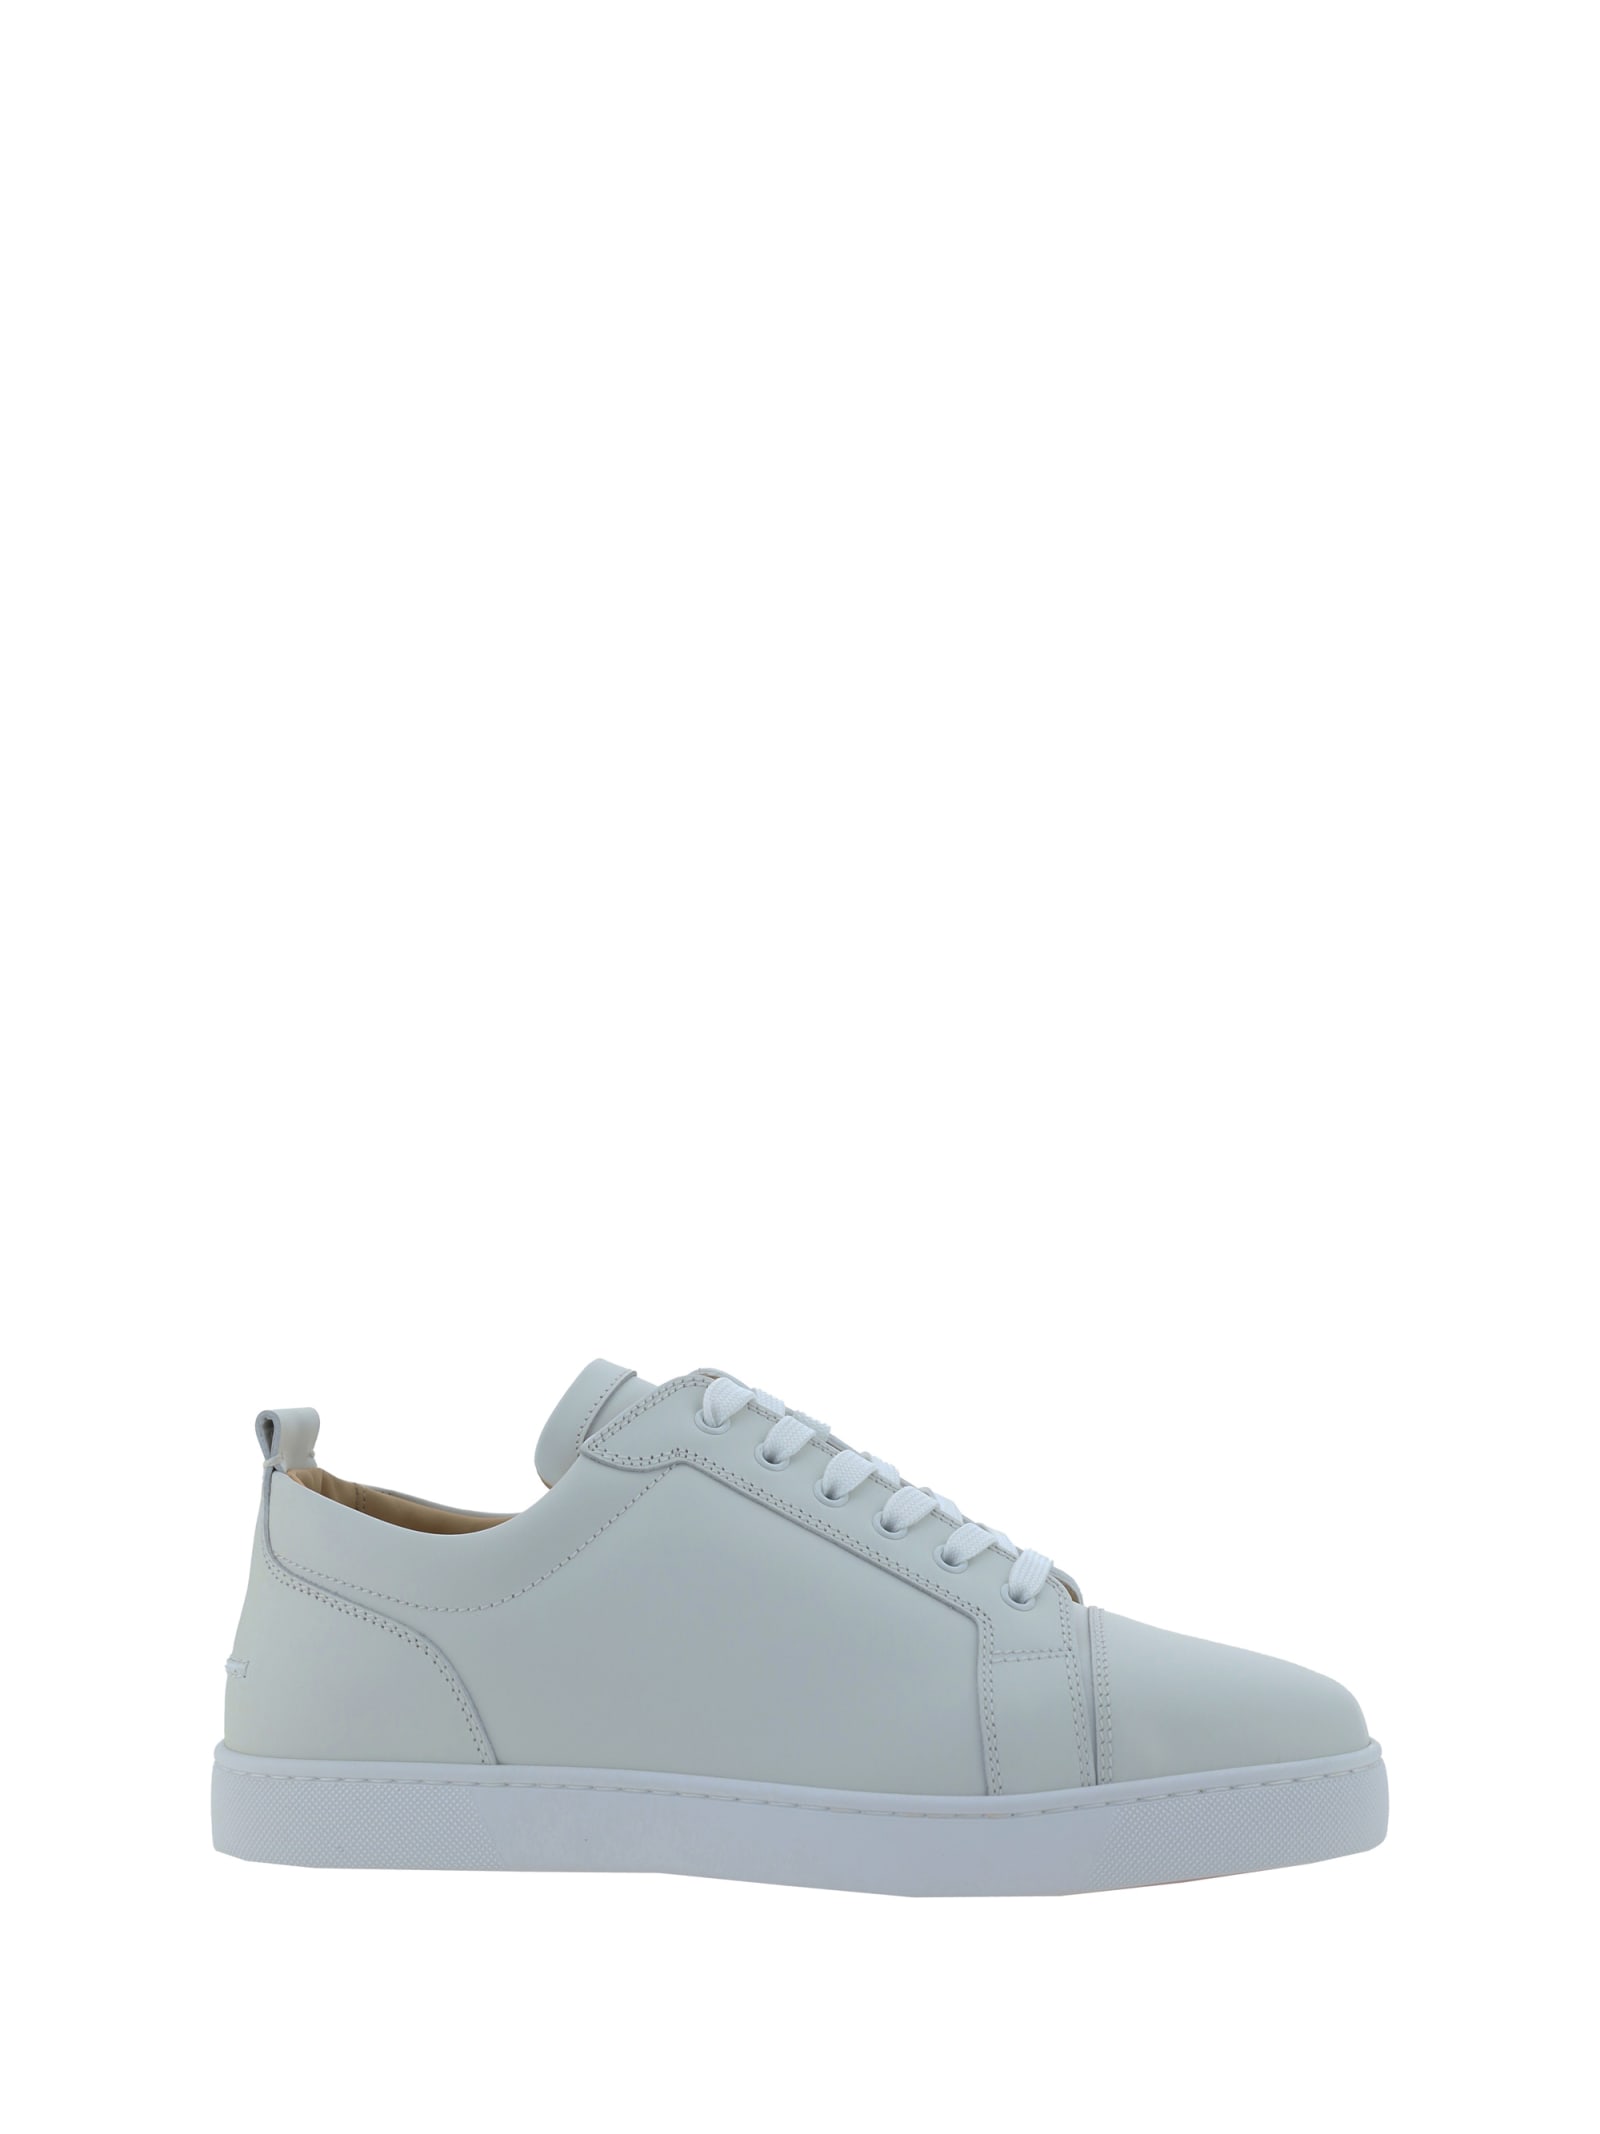 Christian Louboutin Louis Junior Flat Calf Ds Sneakers In White